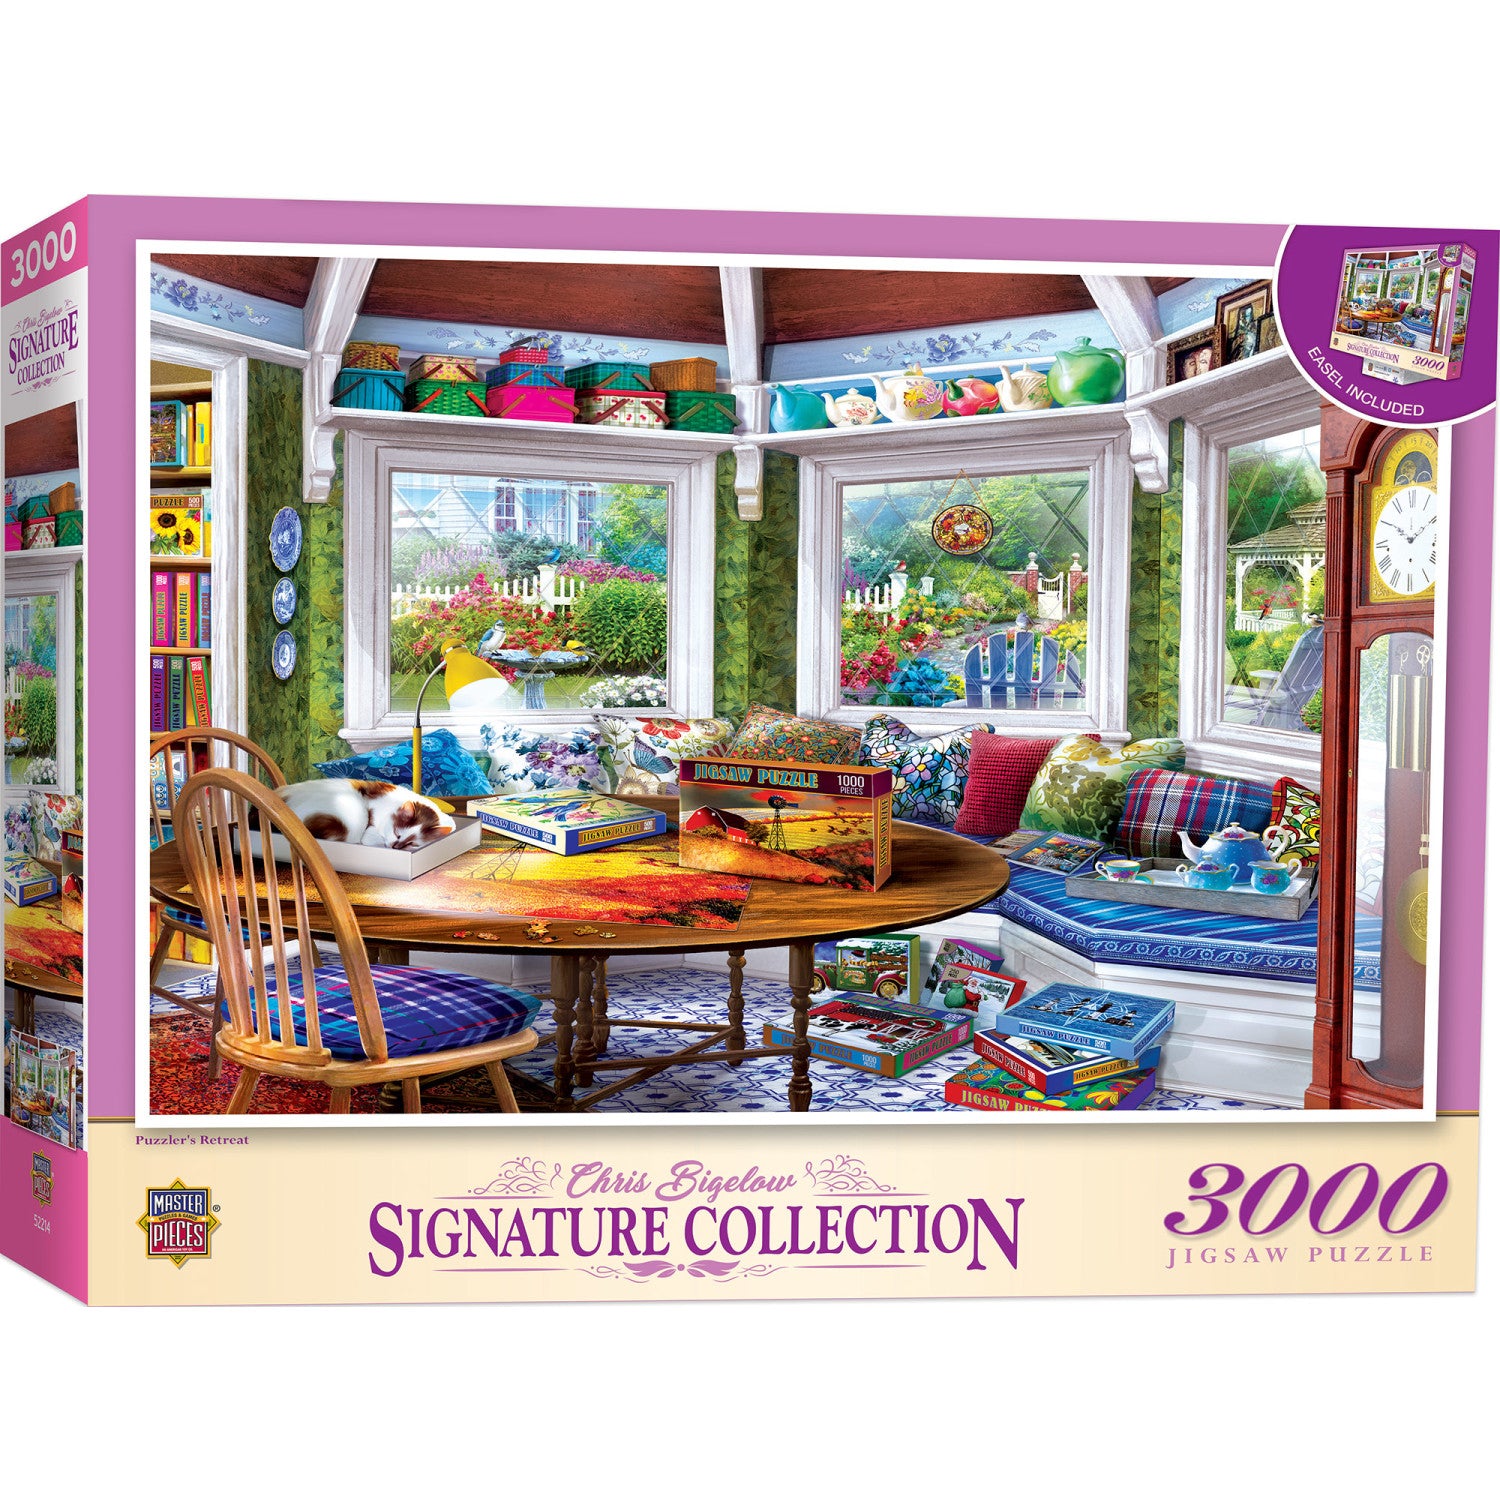 Signature Collection - Puzzler's Retreat 3000 Piece Puzzle - Flawed